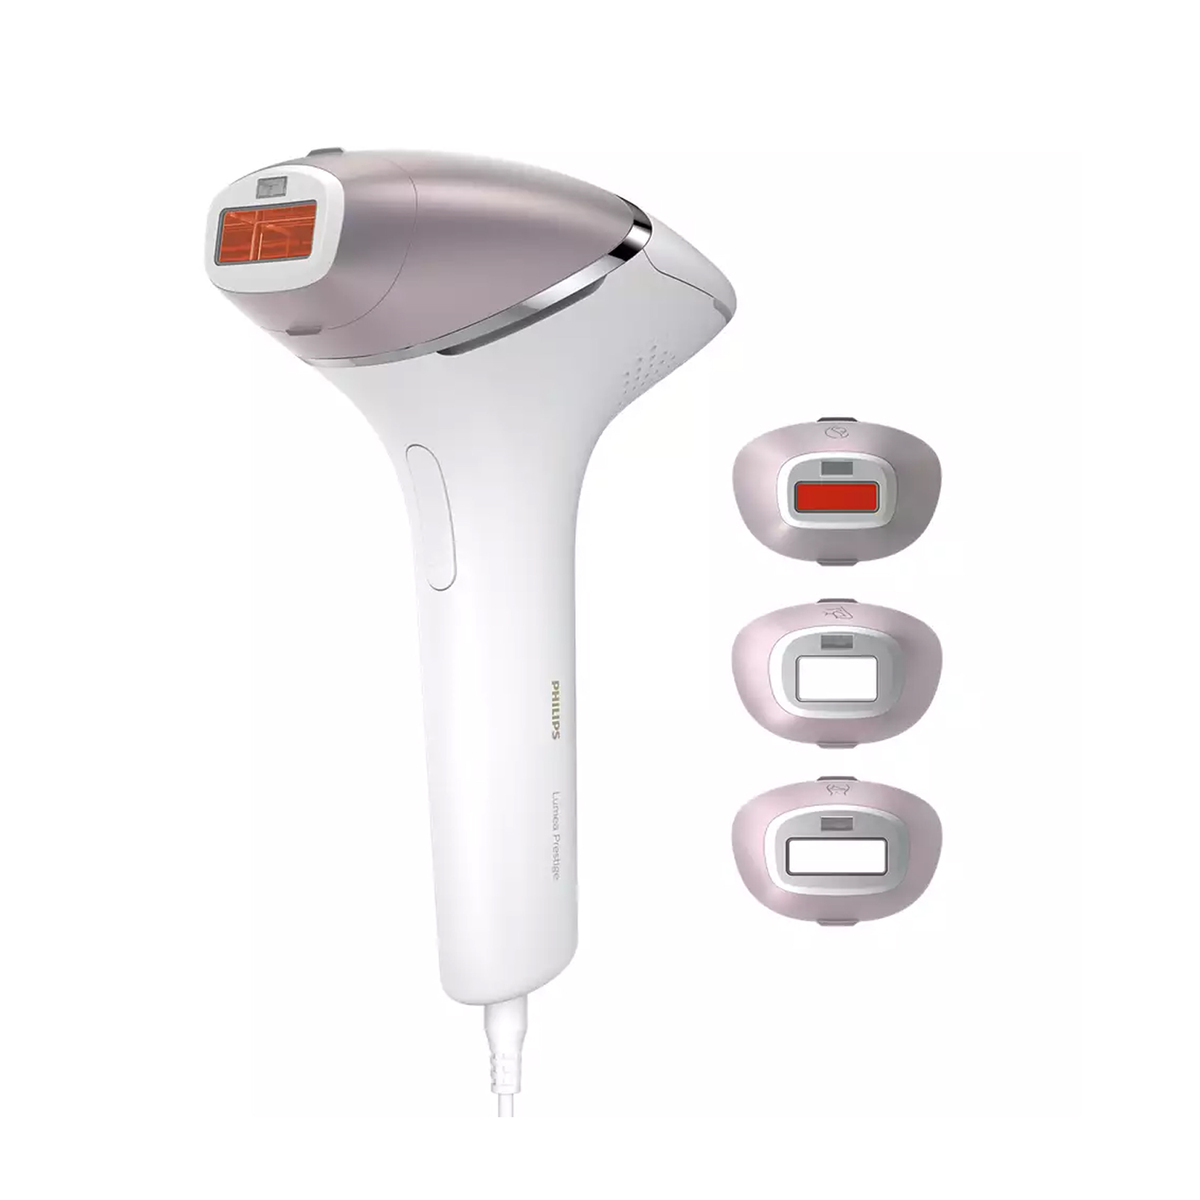 view all Philips Lumea range, female hair removal